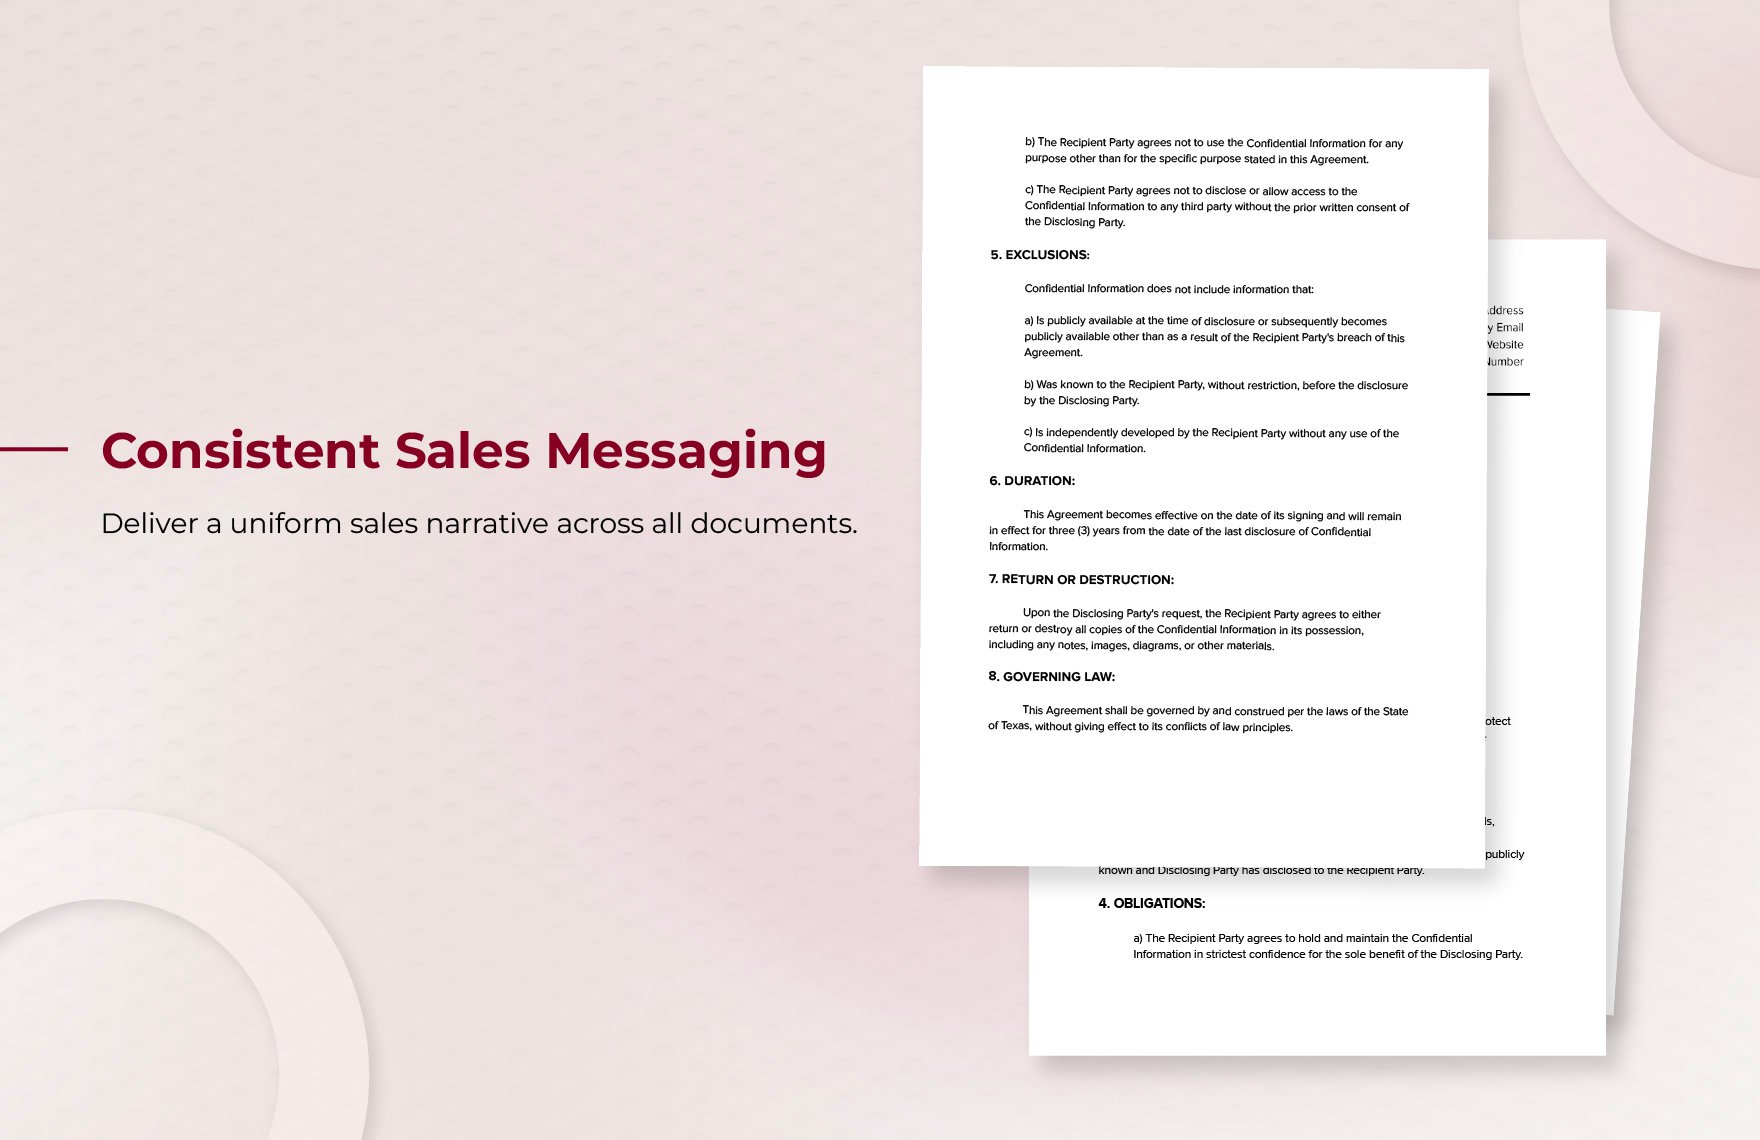 Sales Lead Protection NDA Template